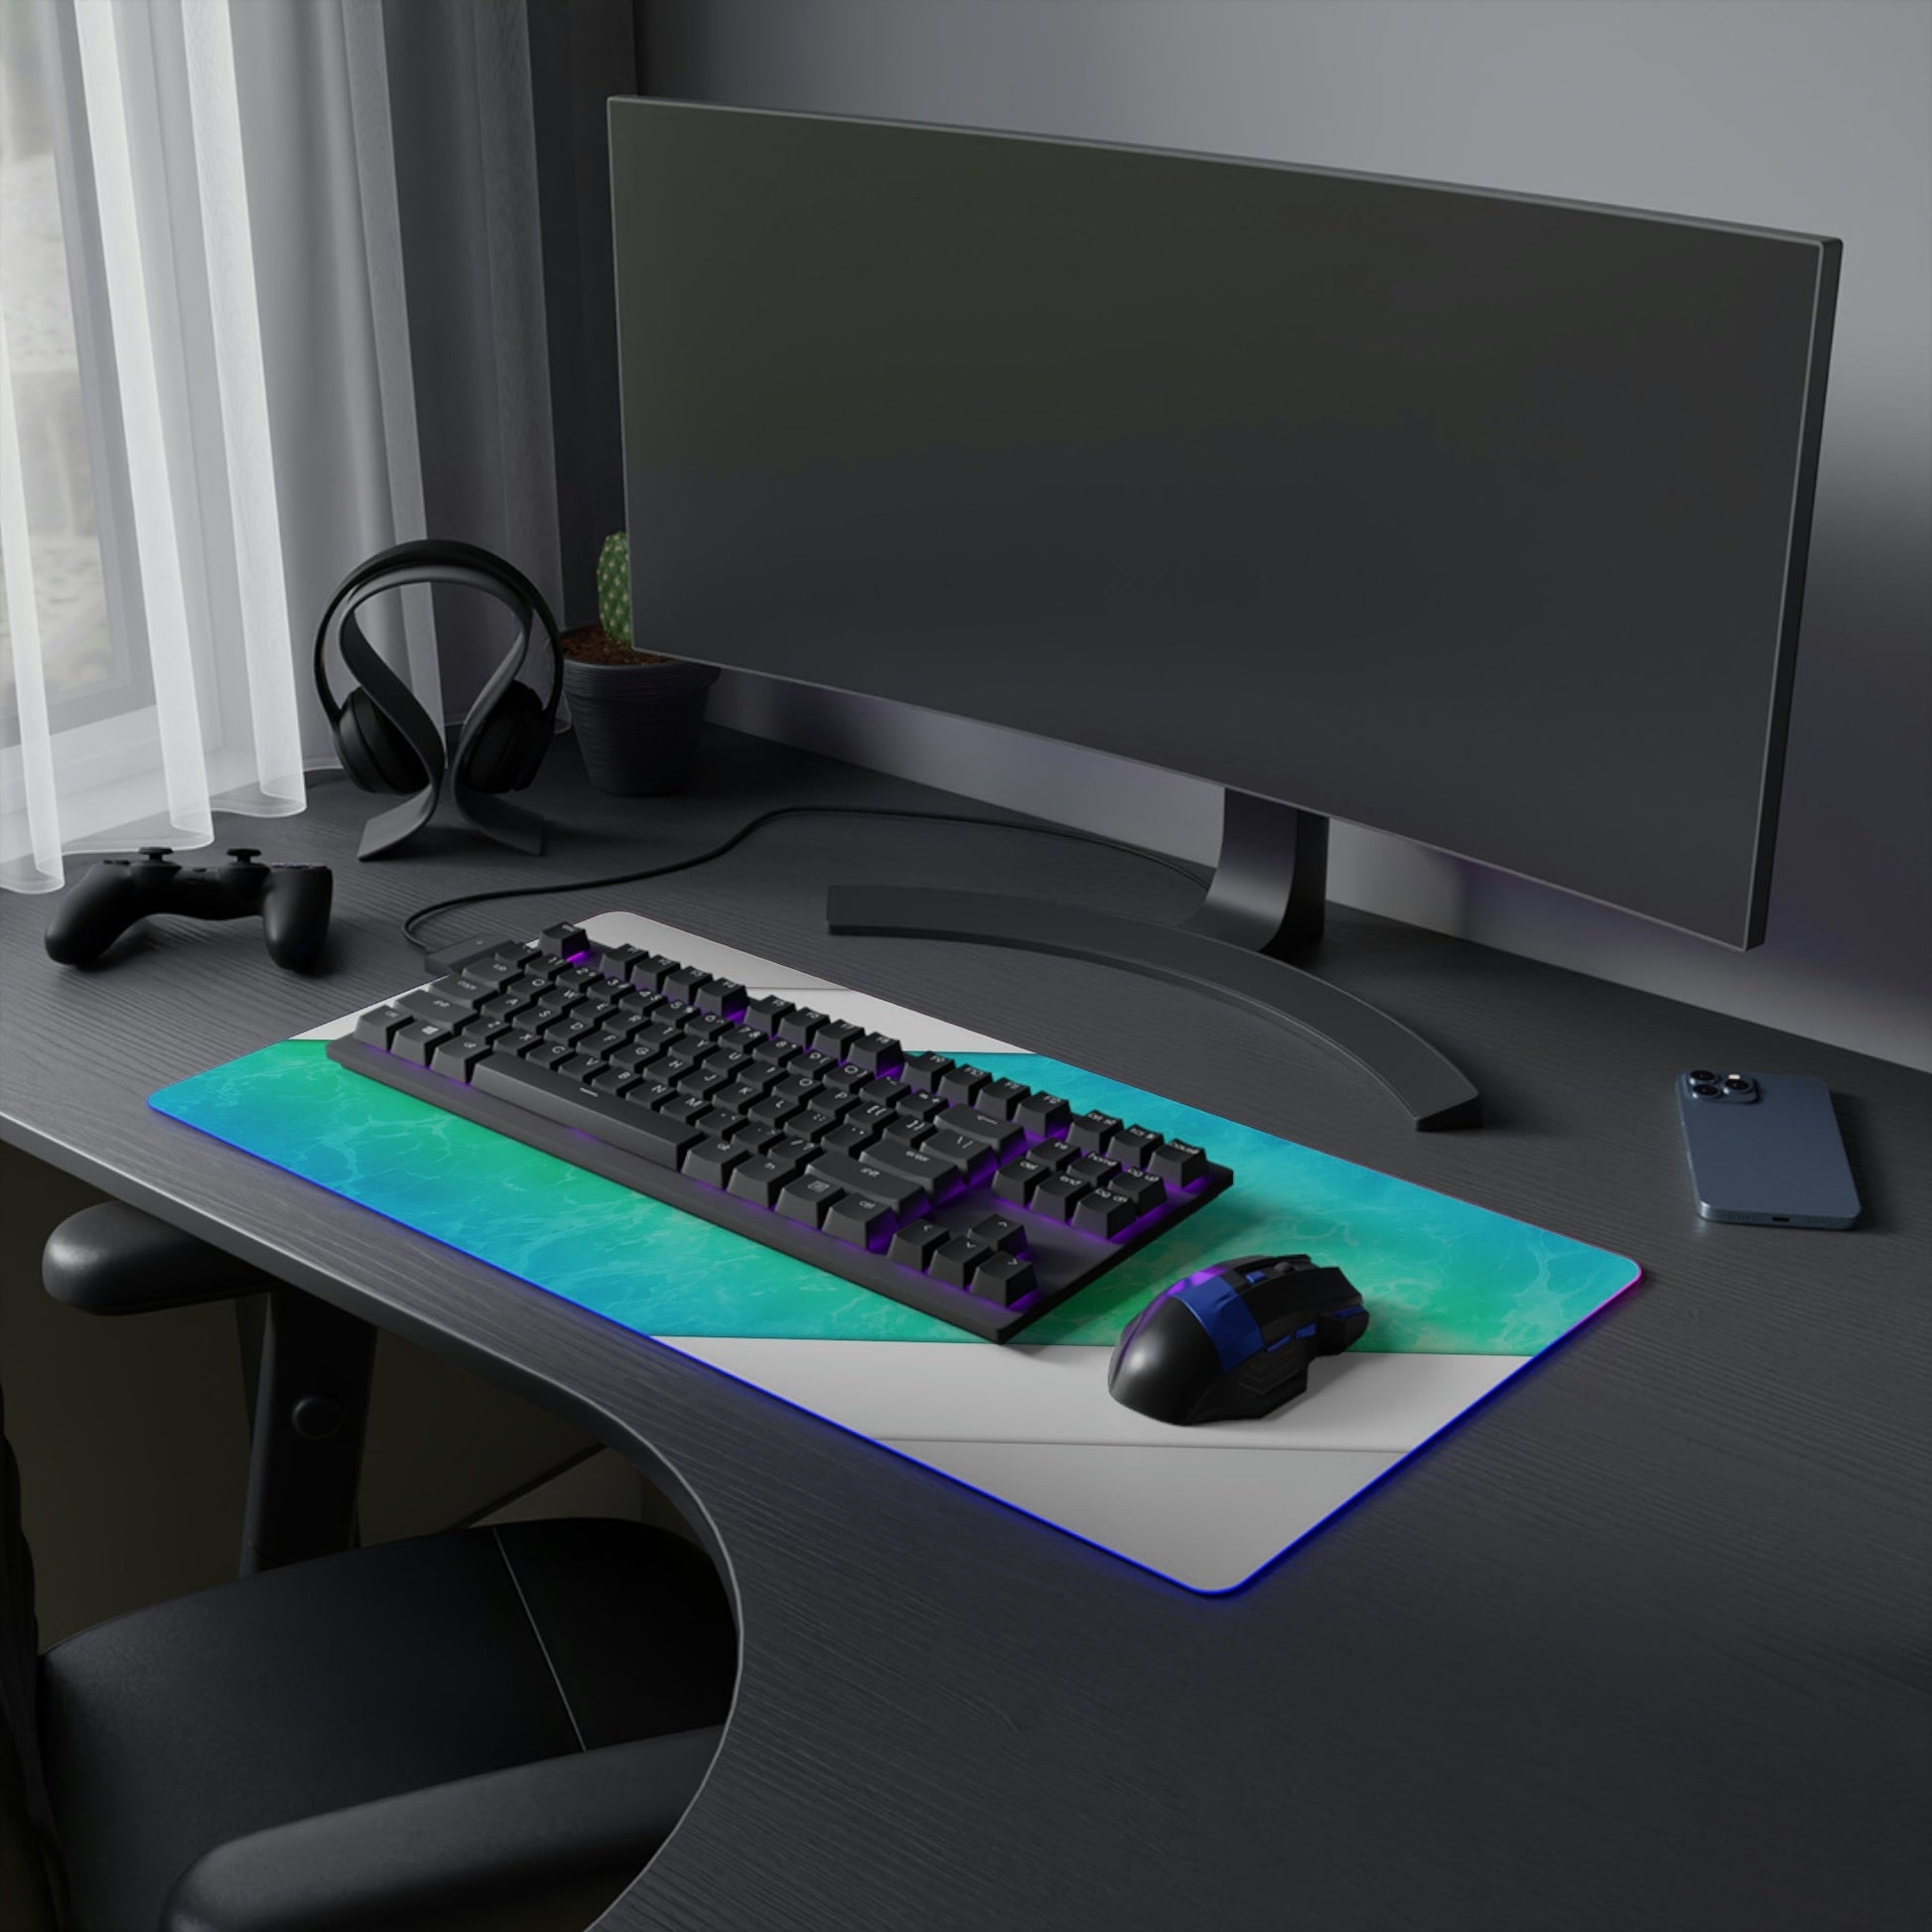 20 Neduz Beach Water LED Gaming Mouse Pad with Clean Steel